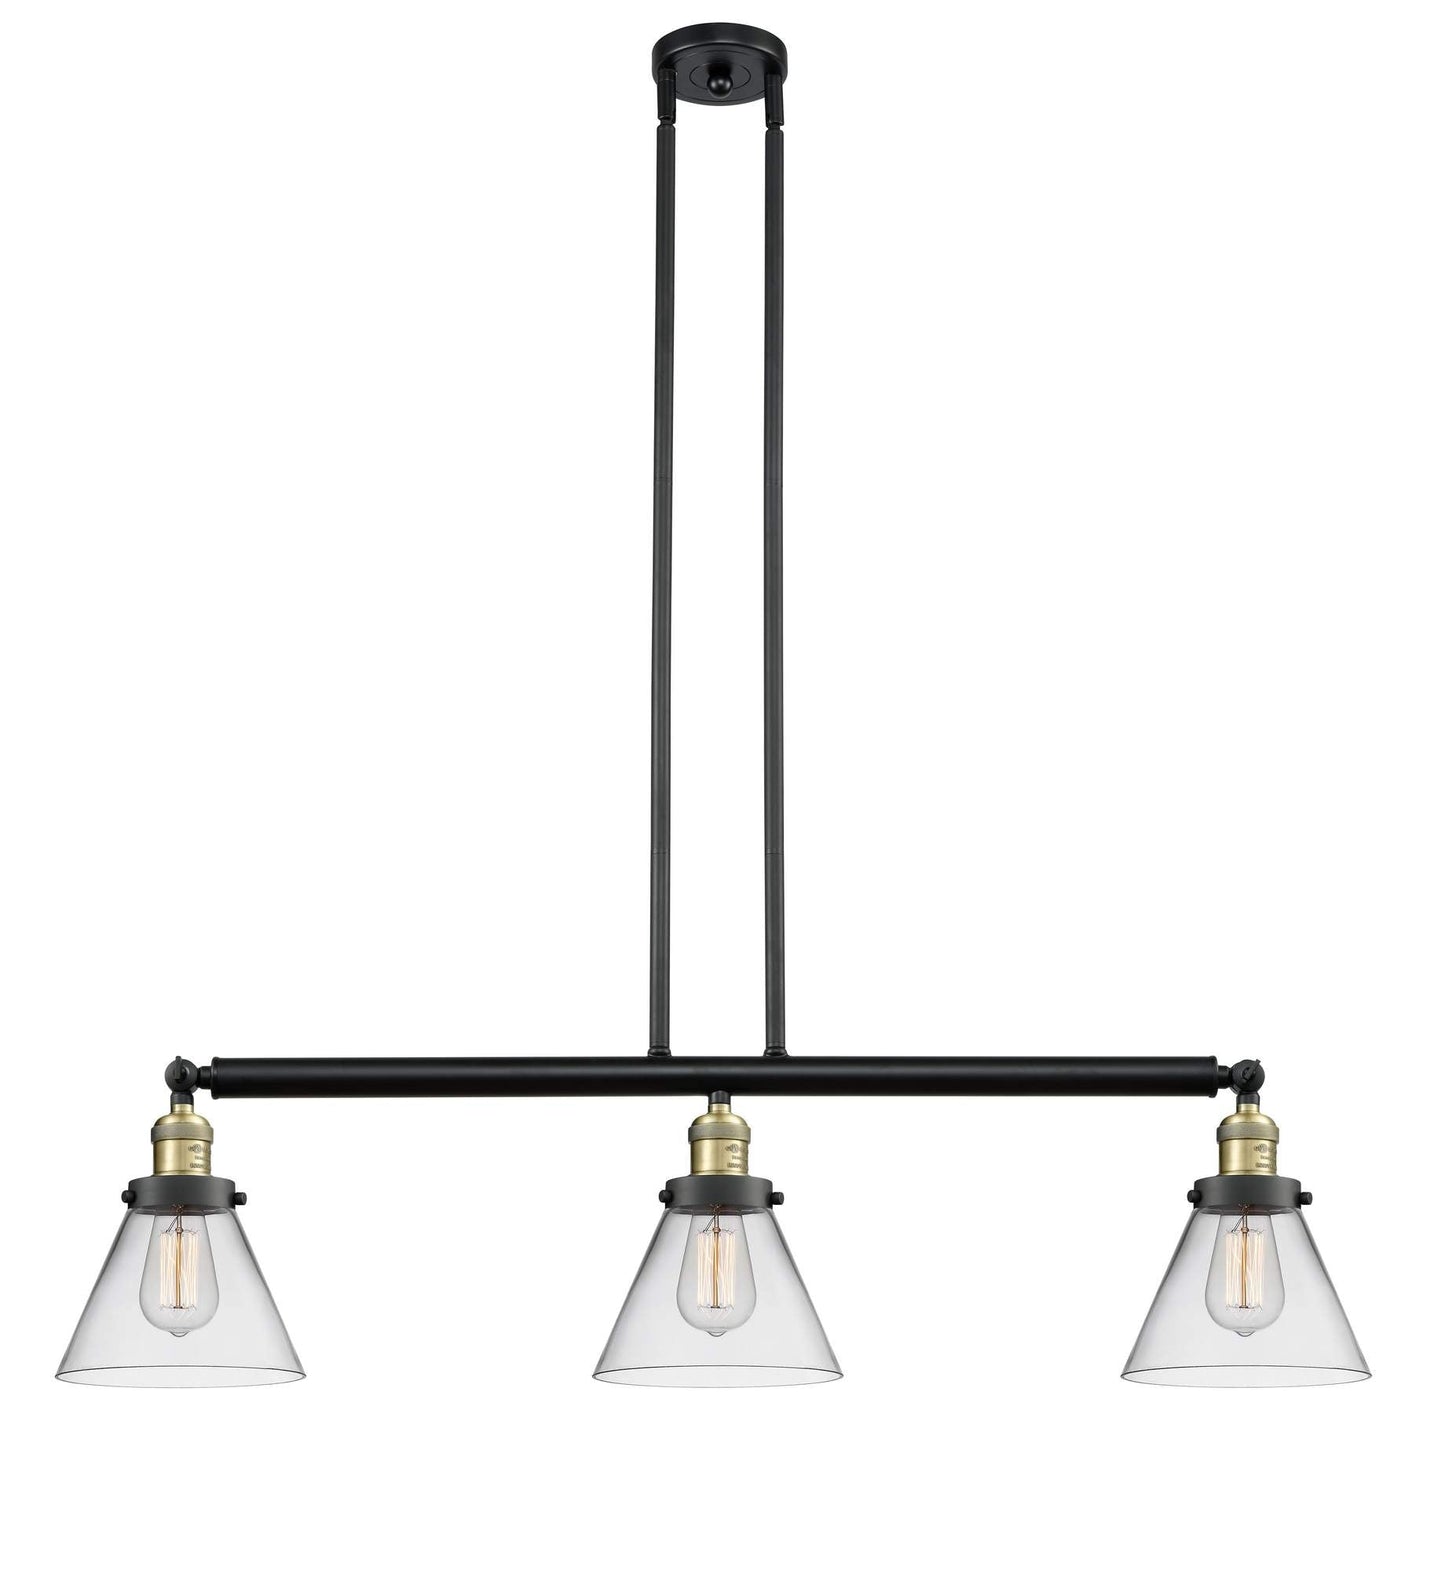 213-BAB-G42 3-Light 40.25" Black Antique Brass Island Light - Clear Large Cone Glass - LED Bulb - Dimmensions: 40.25 x 7.75 x 10<br>Minimum Height : 20.25<br>Maximum Height : 44.25 - Sloped Ceiling Compatible: Yes